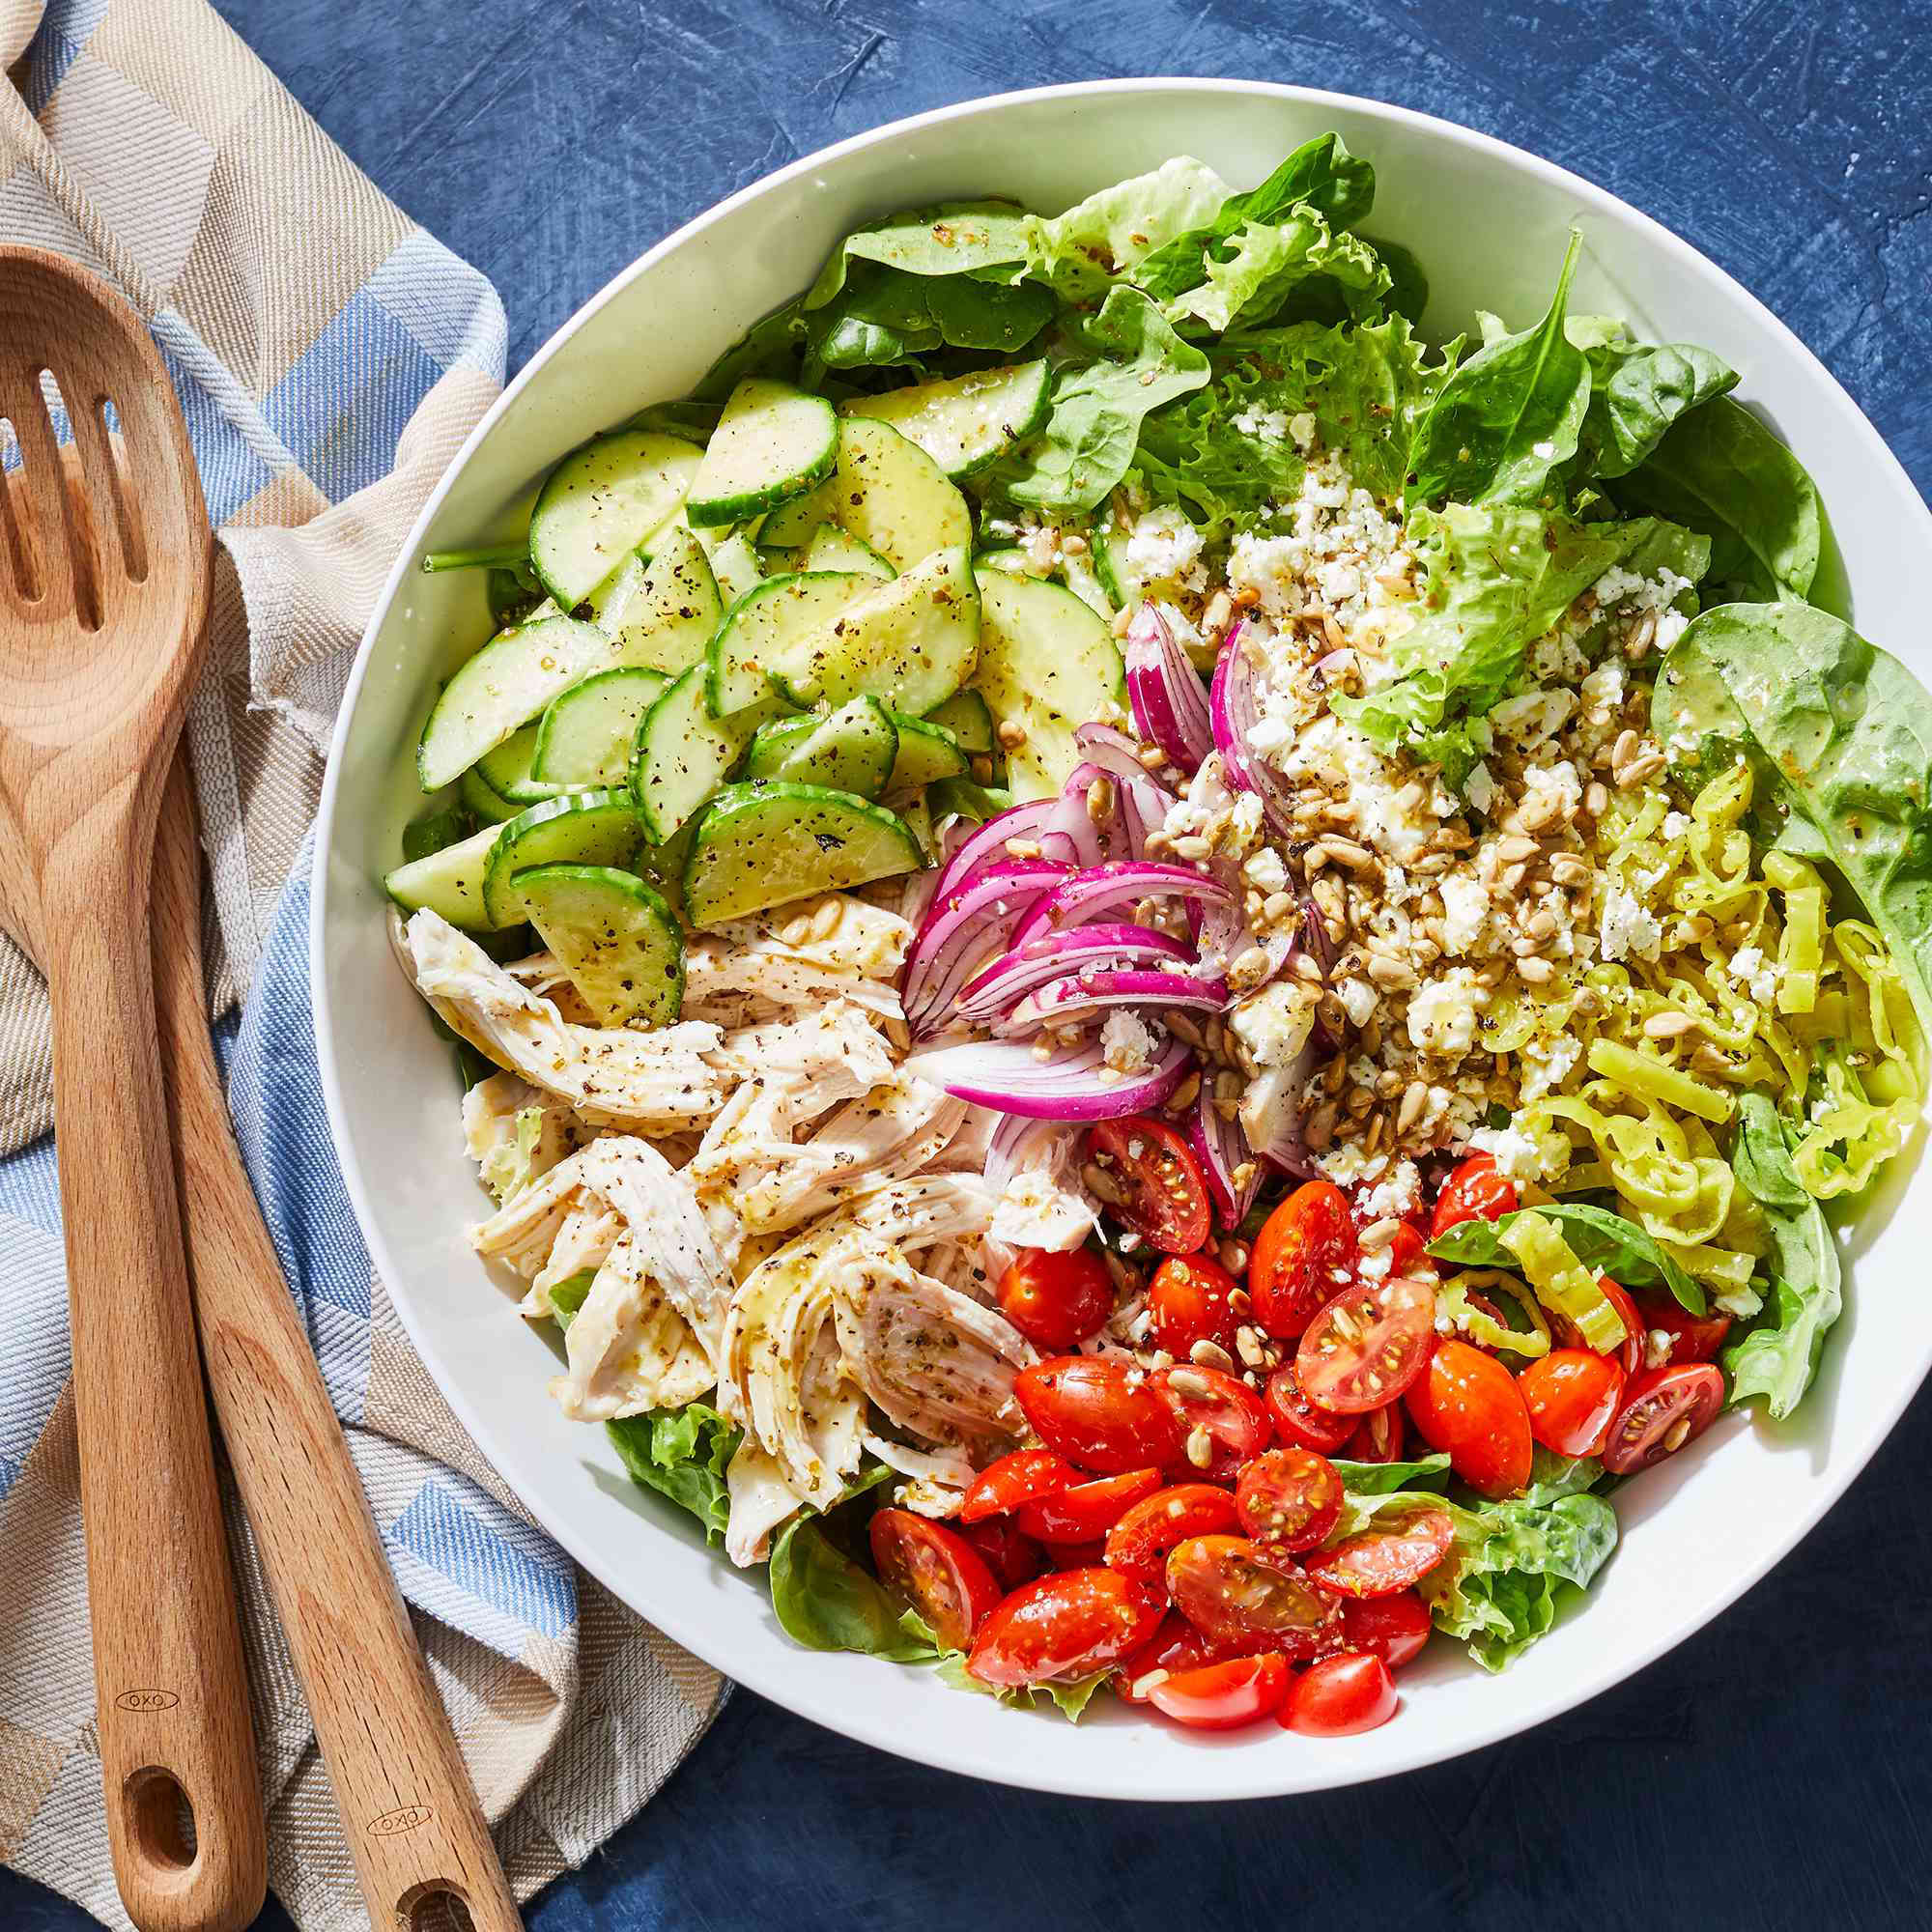 15 Low-Carb, High-Protein Lunches in 3 Steps or Less